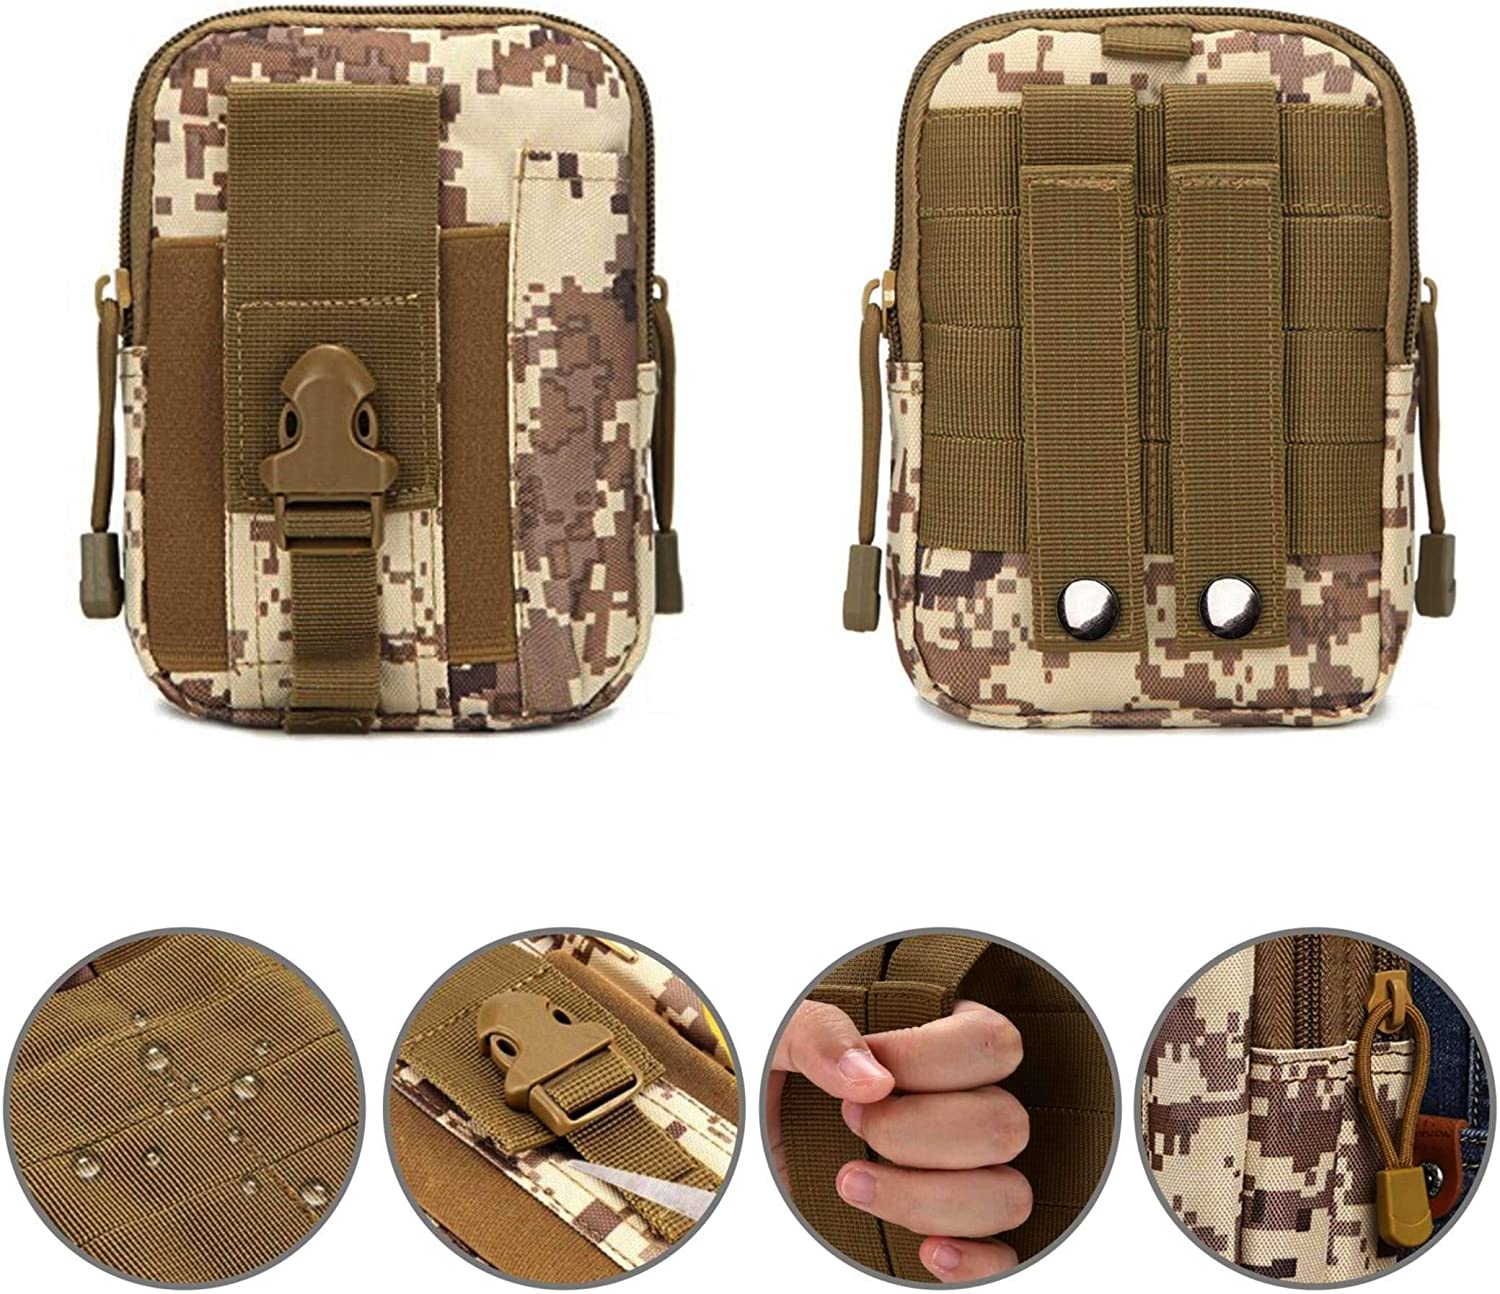 Tactical MOLLE Pouch & Waist Bag for Hiking & Outdoor Activities-56